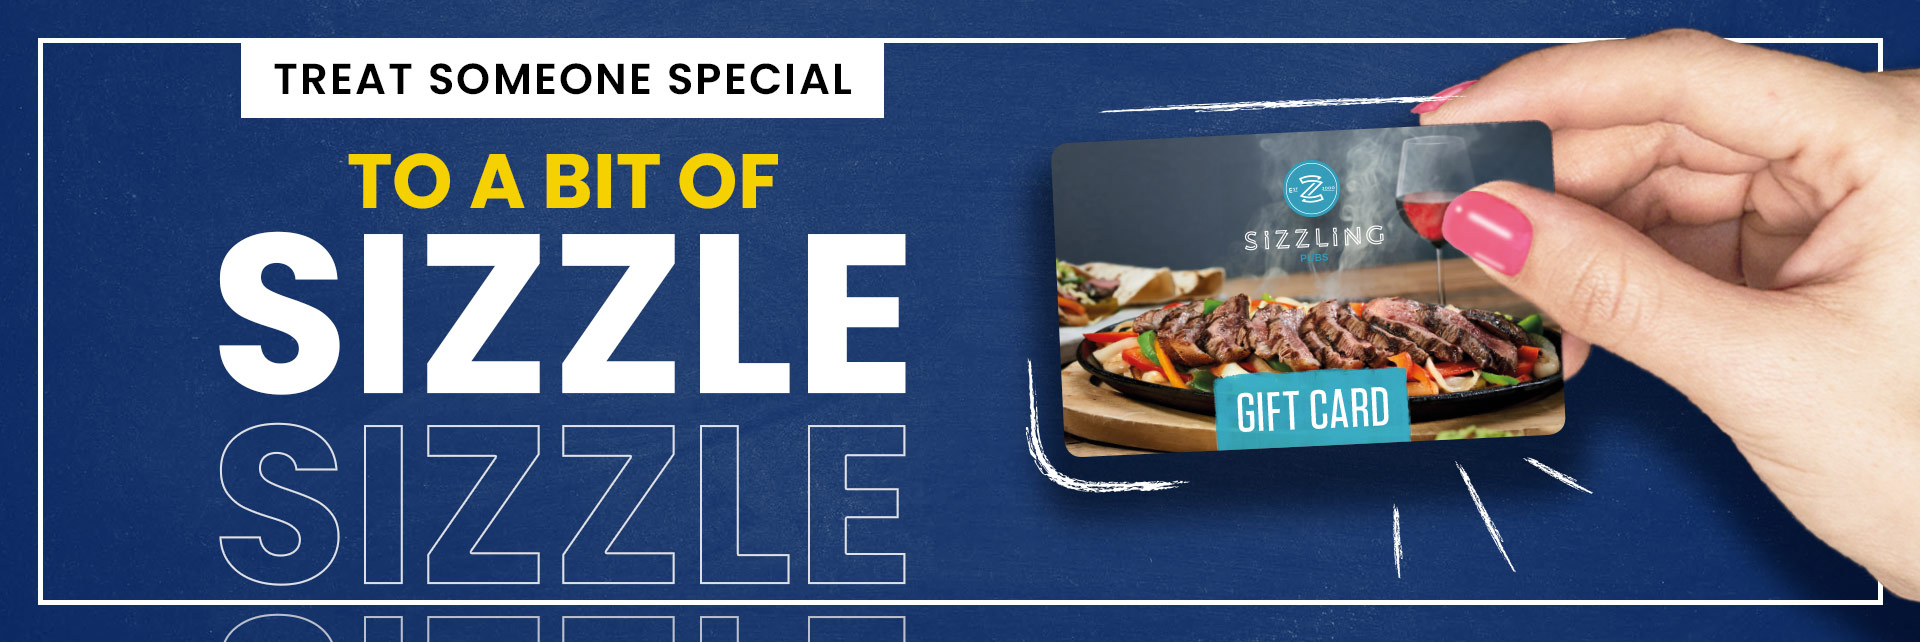 Sizzling Pubs Gift Card at The Highfield Blackpool  in Blackpool